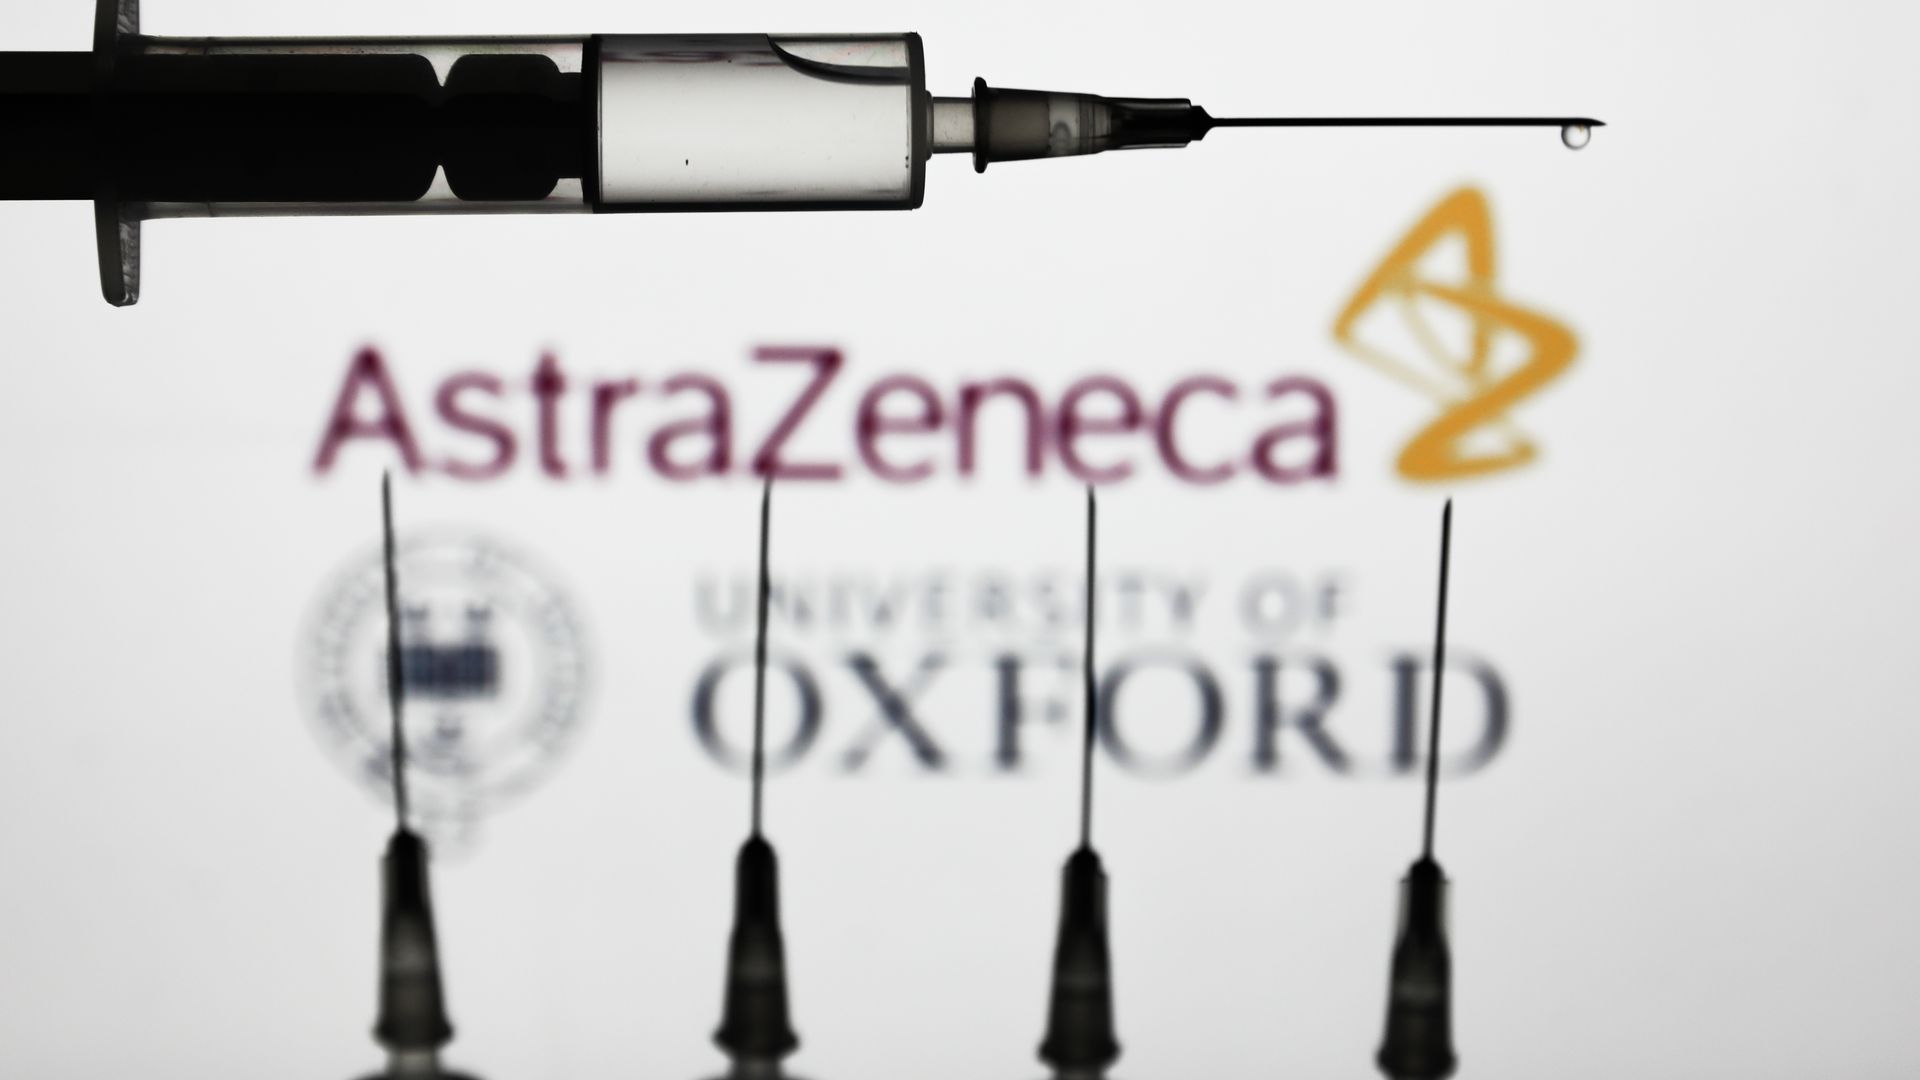 Medical syringes are seen with AstraZeneca and University of Oxford logos displayed on a screen in the background in this illustration photo taken in Poland